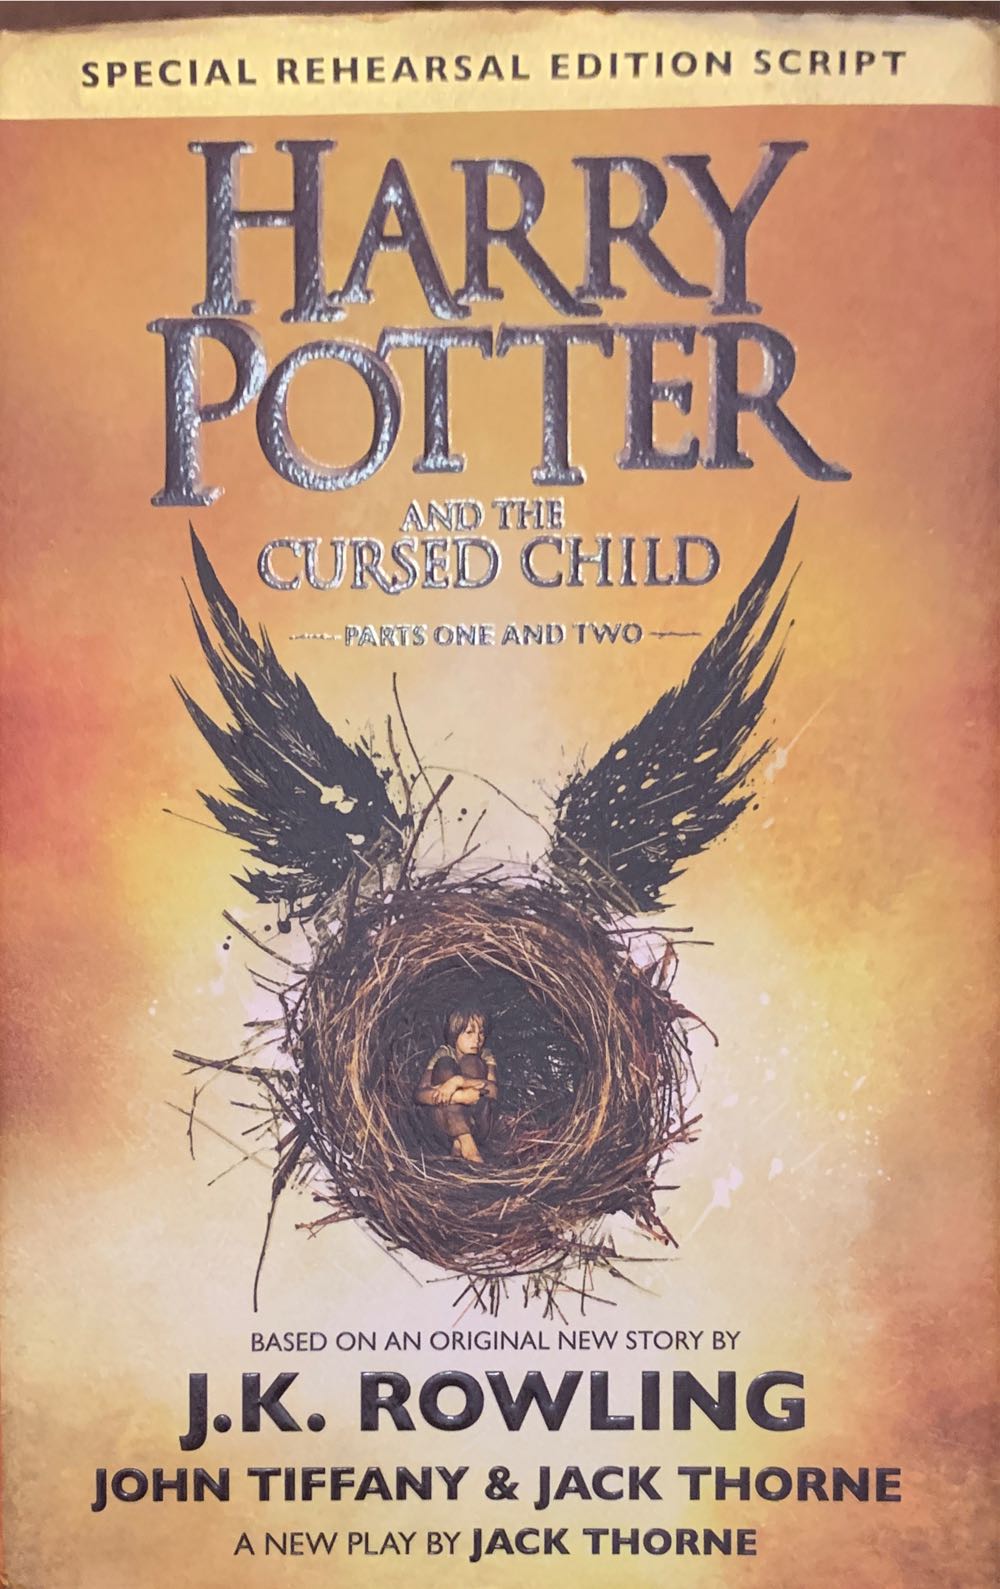 Harry Potter 8: and the Cursed Child - J. K. Rowling (Arthur A. Levine Books / Scholastic Press - Hardcover) book collectible [Barcode 9781338099133] - Main Image 4